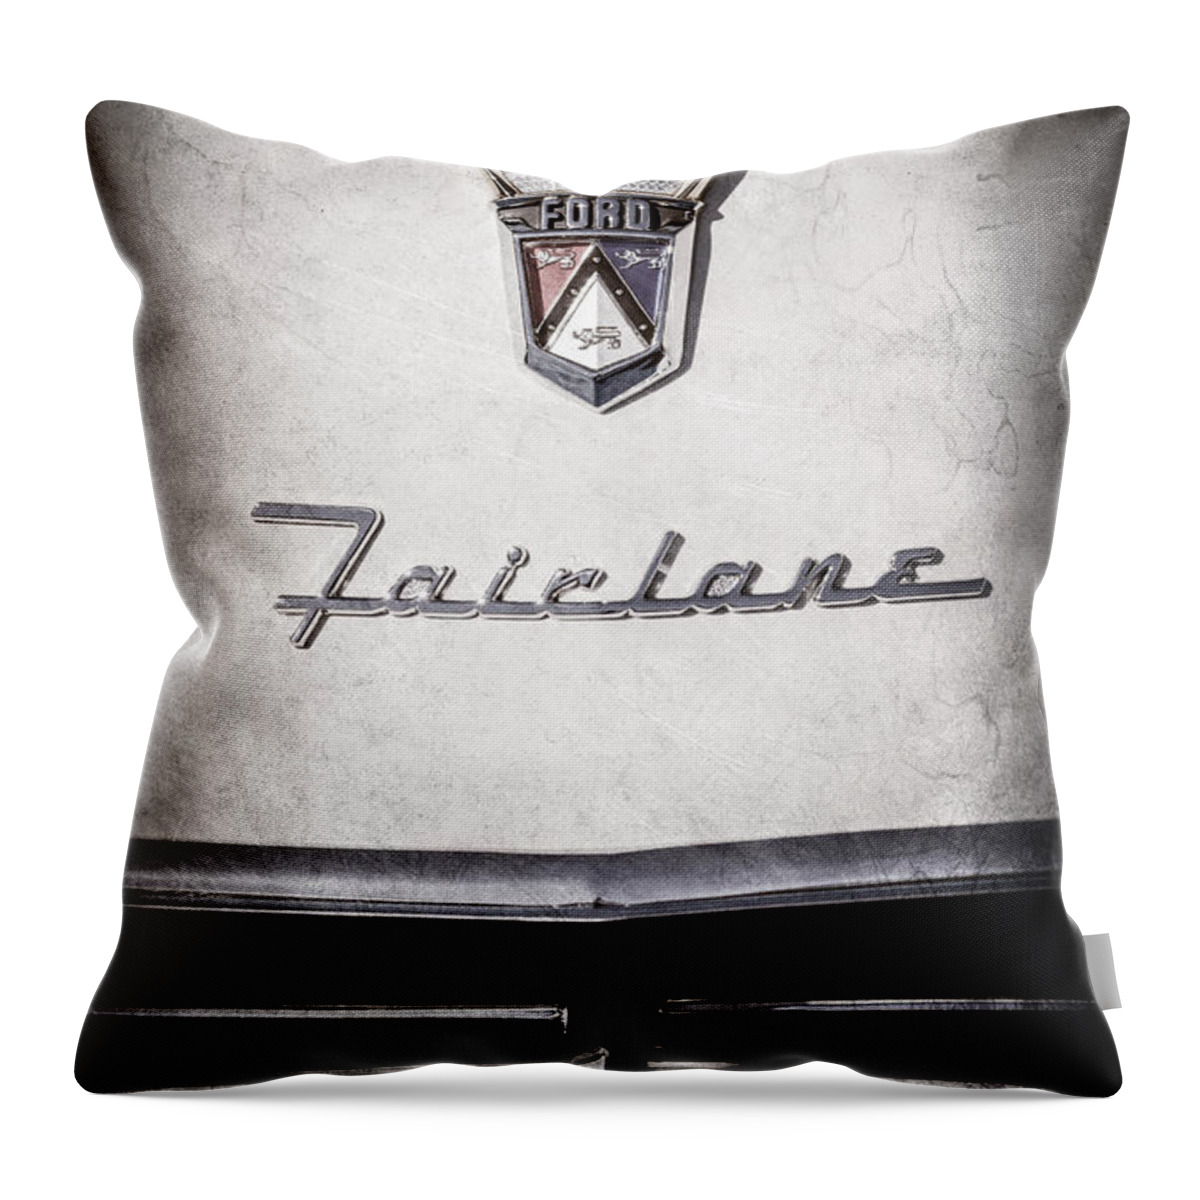 1955 Ford Fairlane Crown Victoria Emblem Throw Pillow featuring the photograph 1955 Ford Fairlane Crown Victoria Emblem -1713ac by Jill Reger